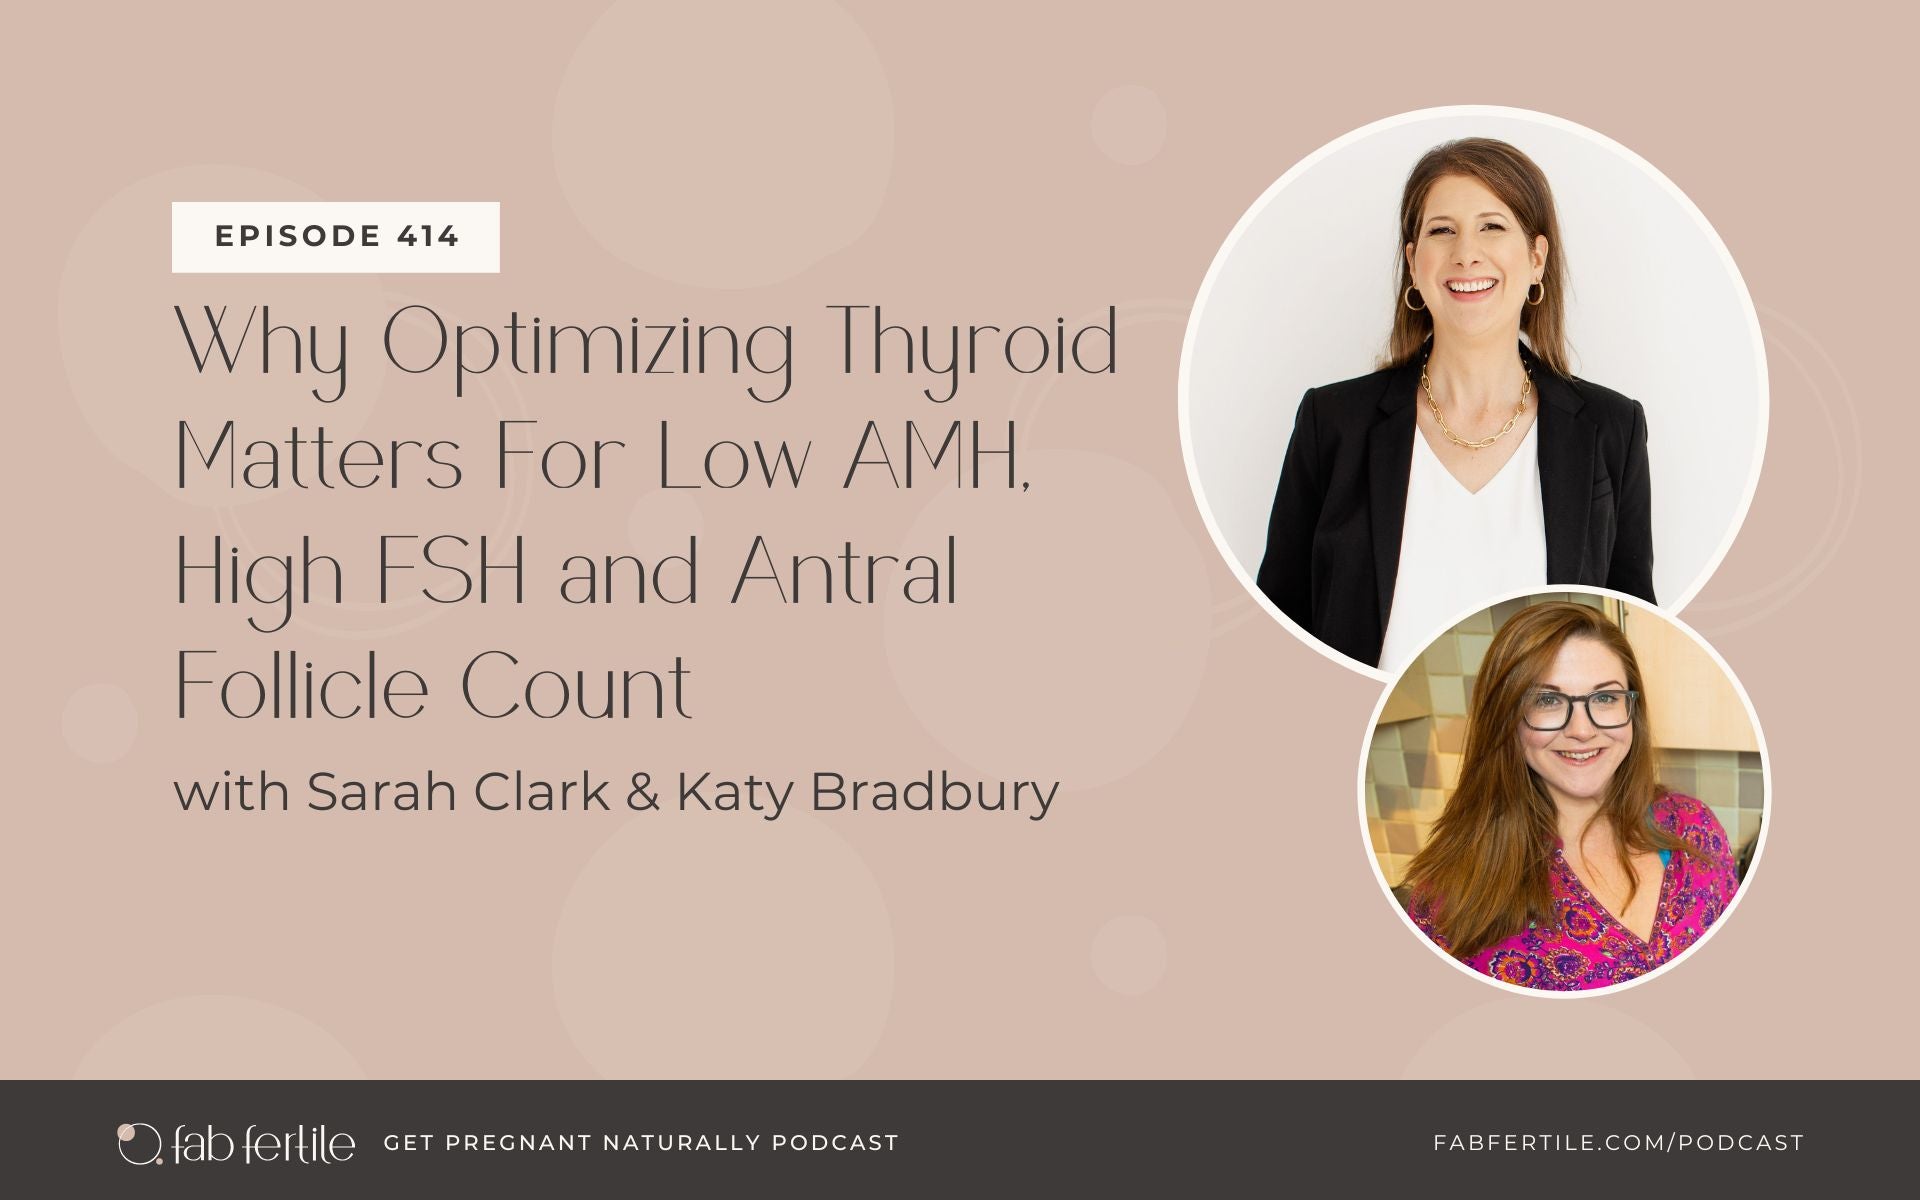 Why Optimizing Thyroid Matters For Low AMH, High FSH and Antral Follicle Count